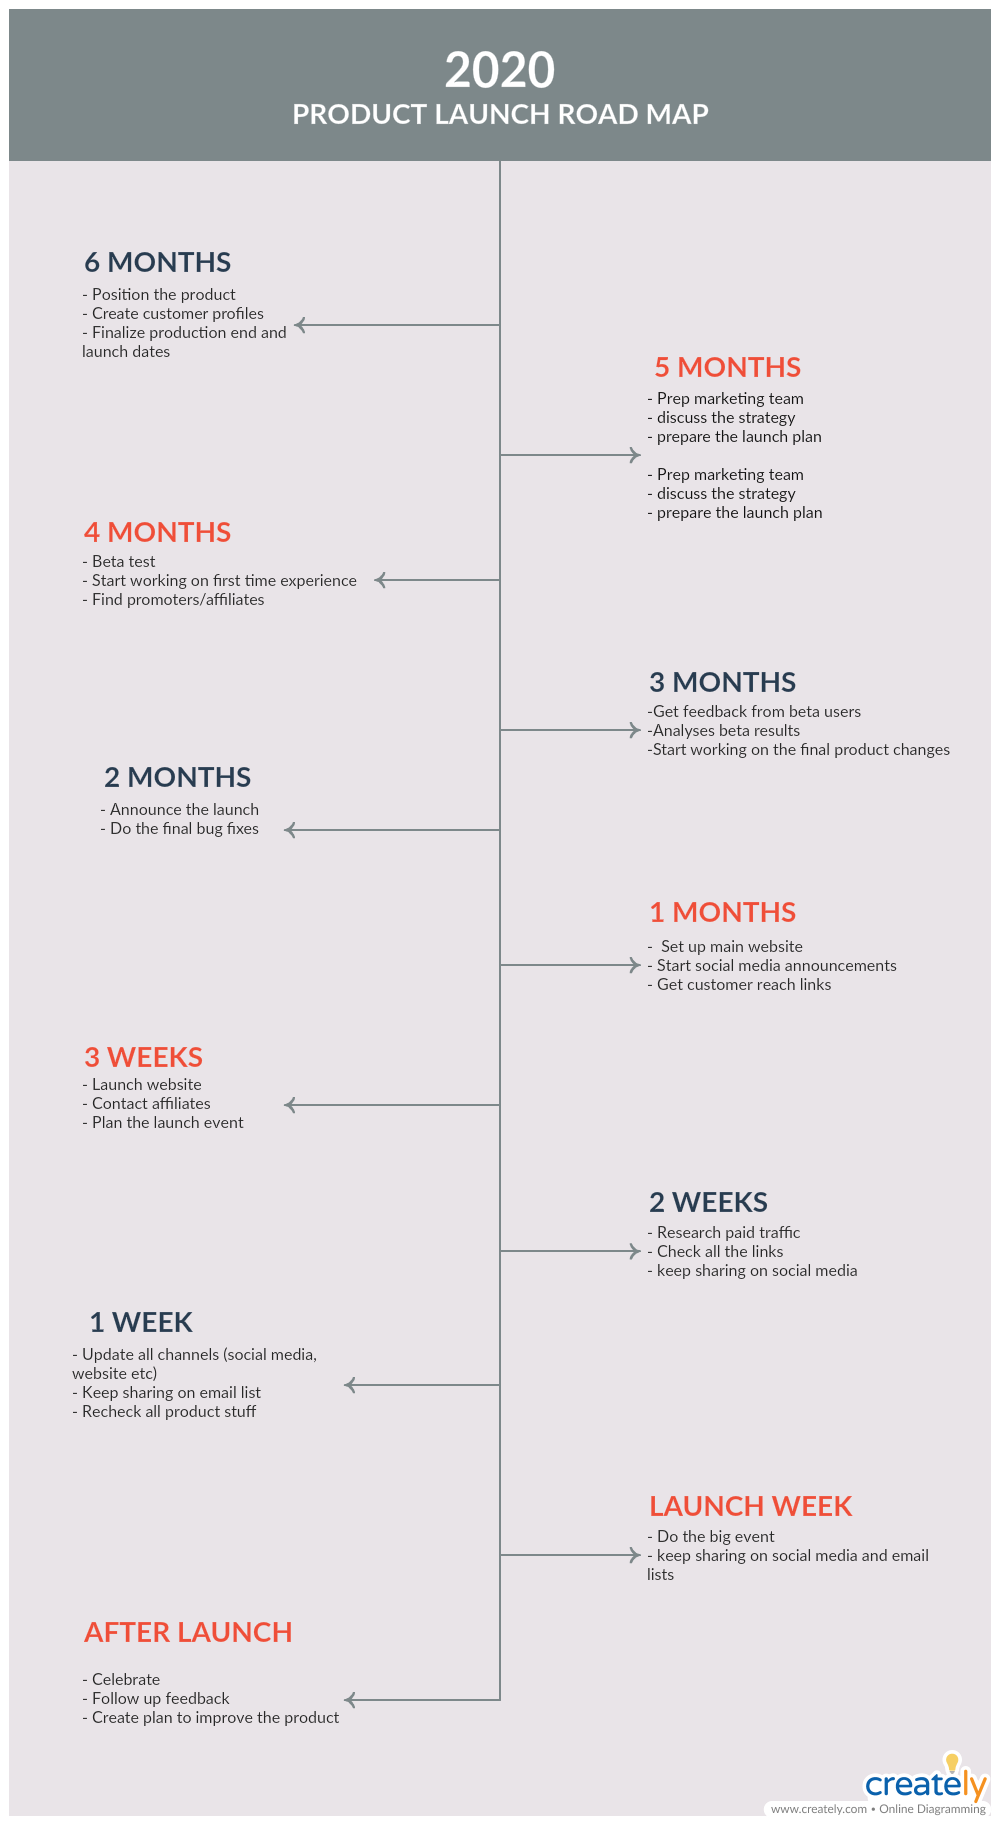 Product Launch Timeline - Launching a product 